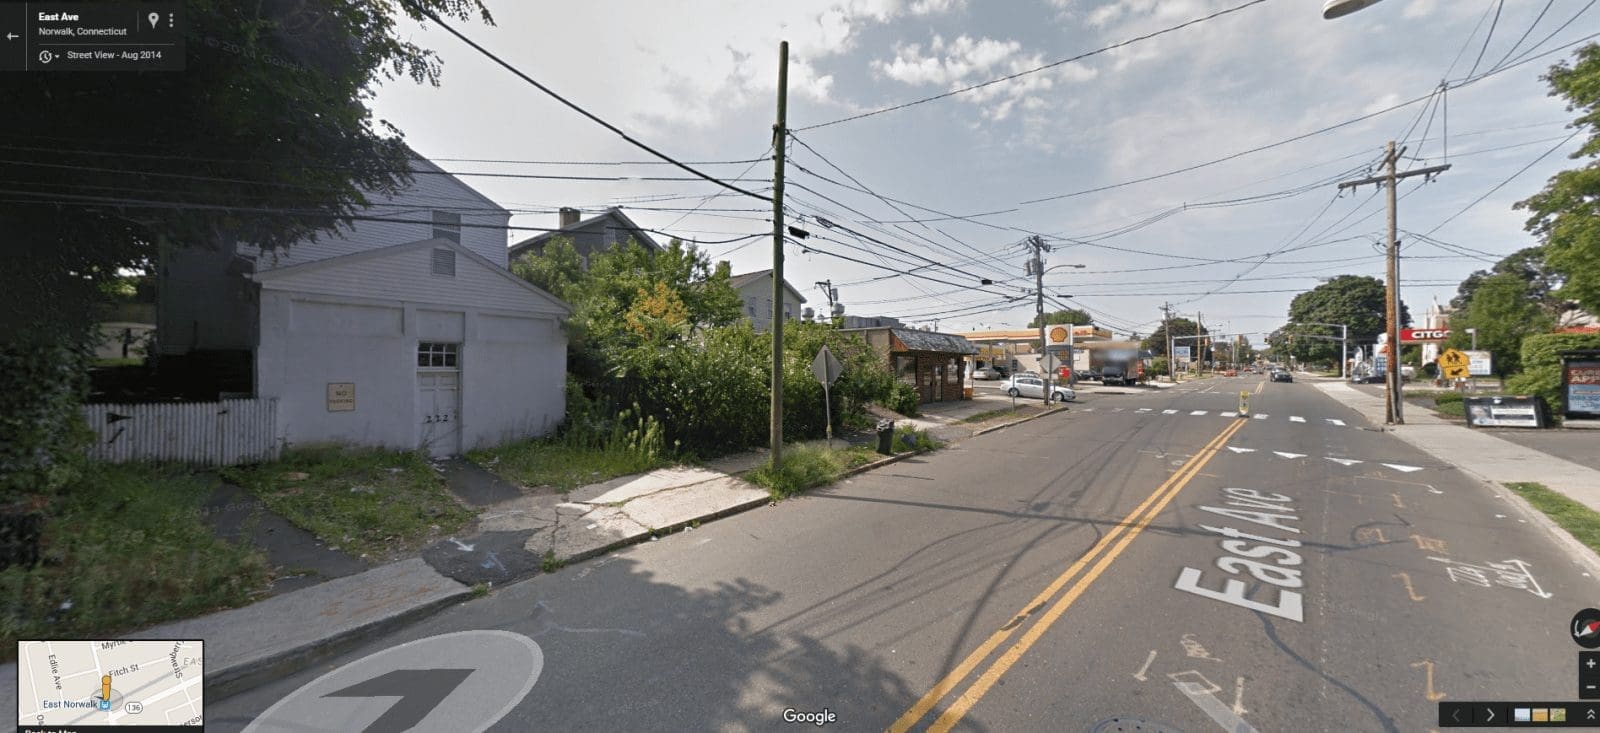 Norwalk Council eyeing $359K for East Avenue widening